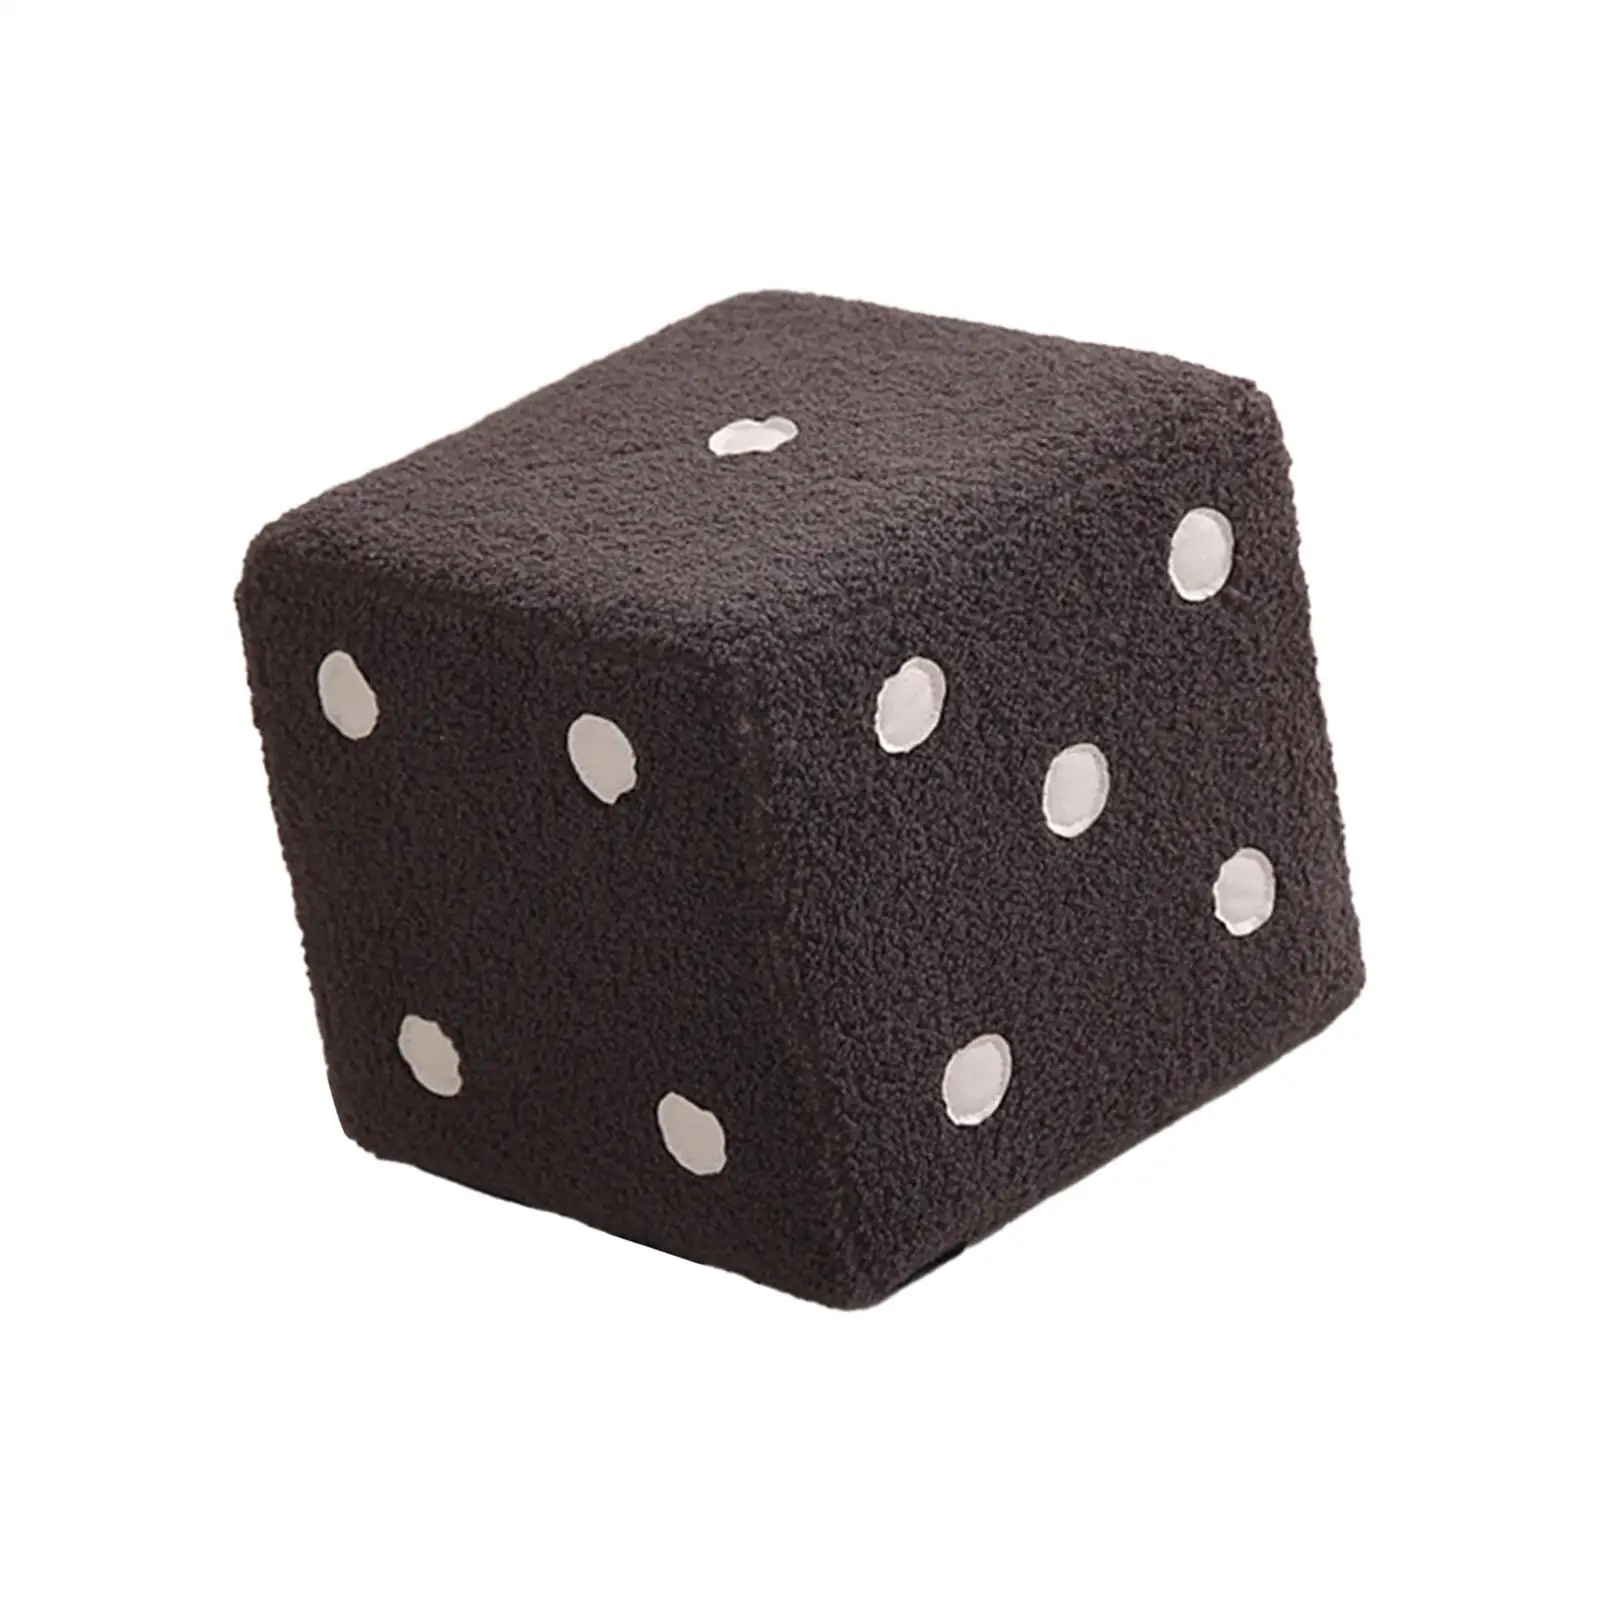 Dice Cube Ottoman, Dice Cubic Foot Stool, Small Non Skid Furniture Sturdy Base Foot Rest for Apartment Entryway Bedroom Couch